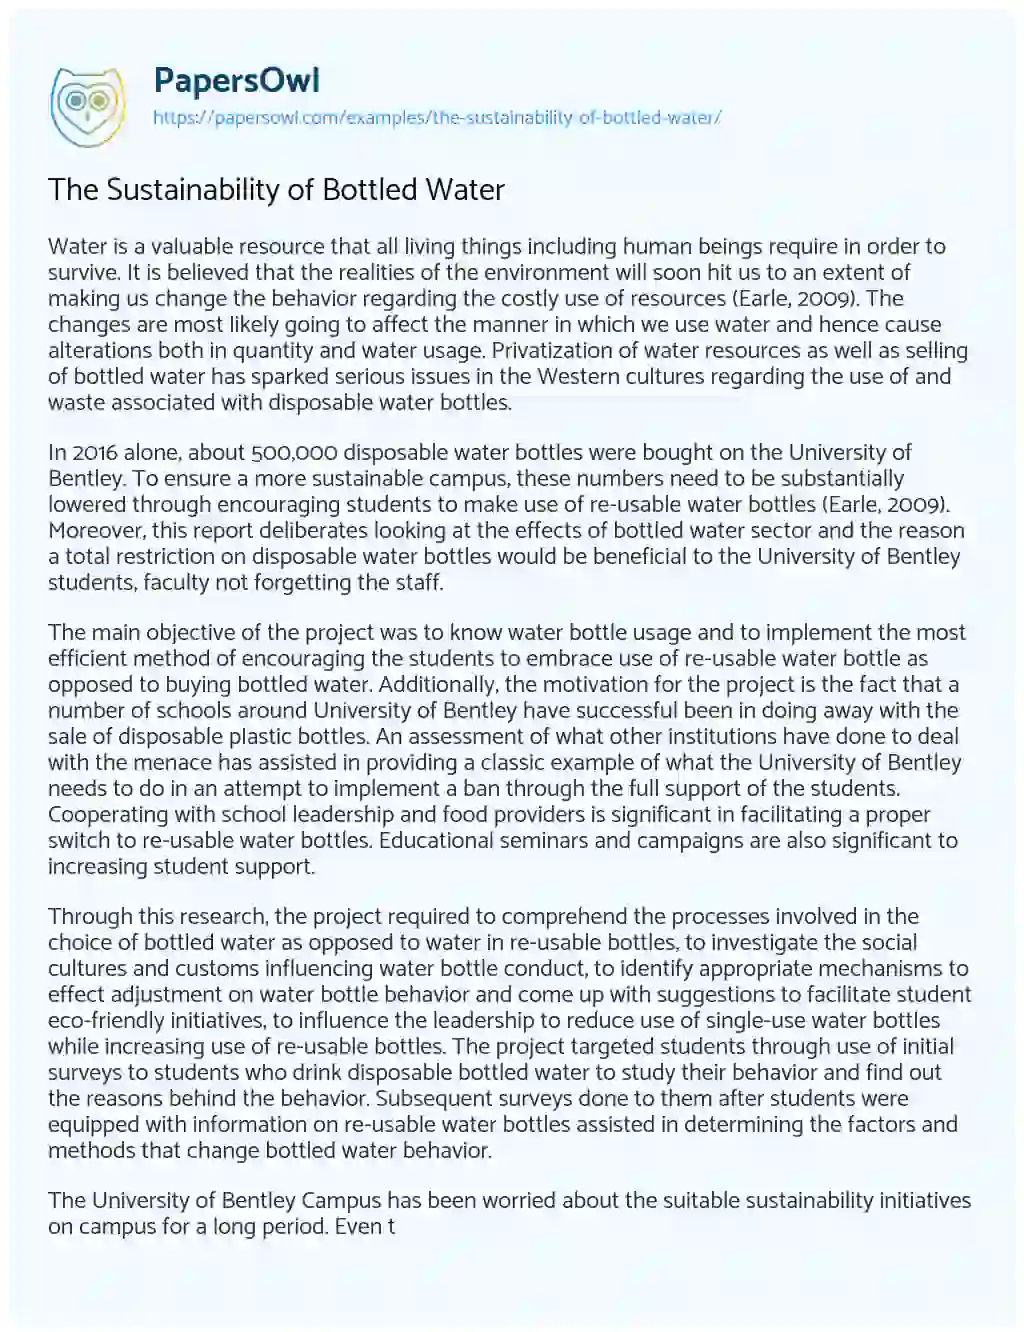 Essay on The Sustainability of Bottled Water